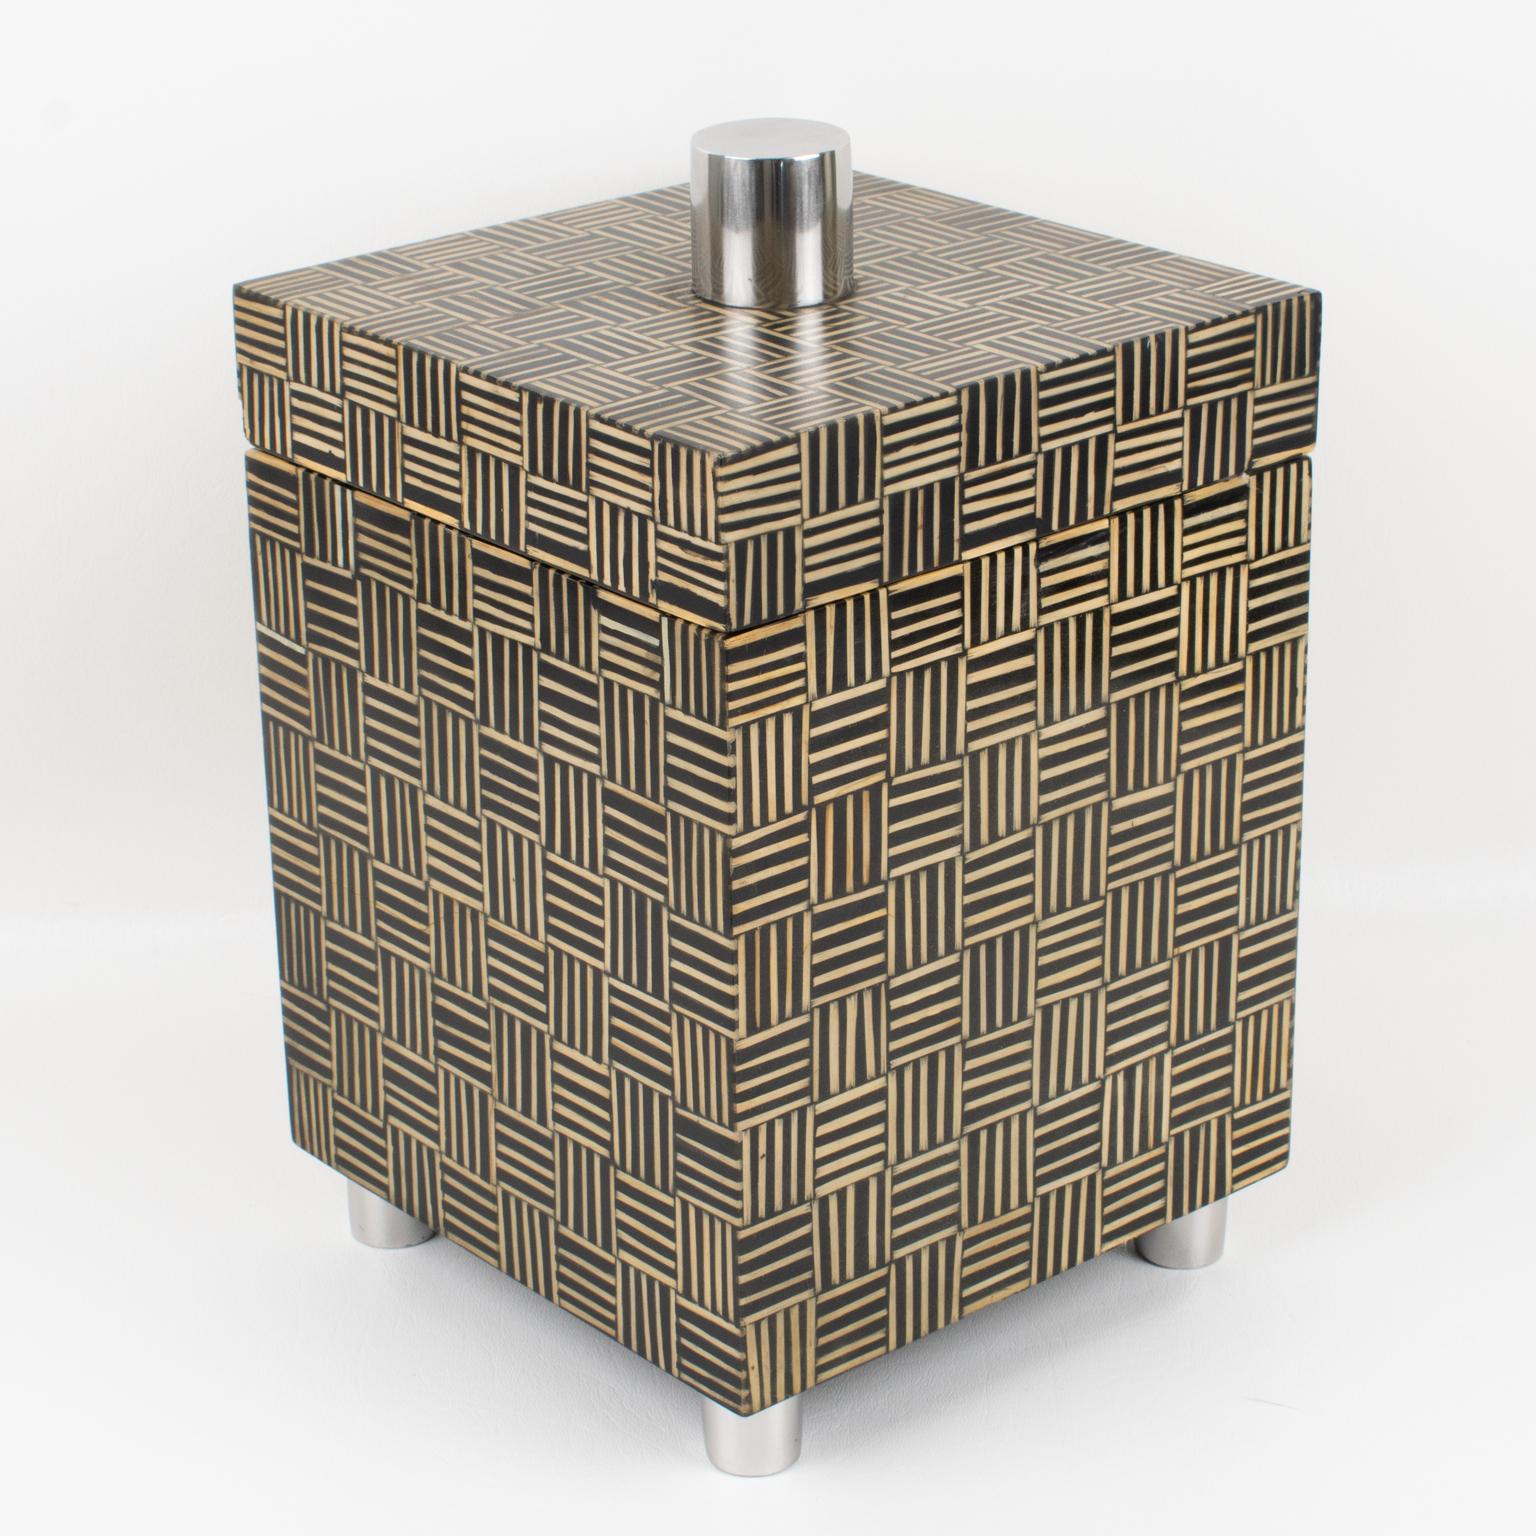 This remarkable modernist decorative box dates back to the 1970s. It boasts a tall structure that's sure to capture anyone's attention. The box is square-shaped and features an interior made of solid tropical wood. What's unique about this box is